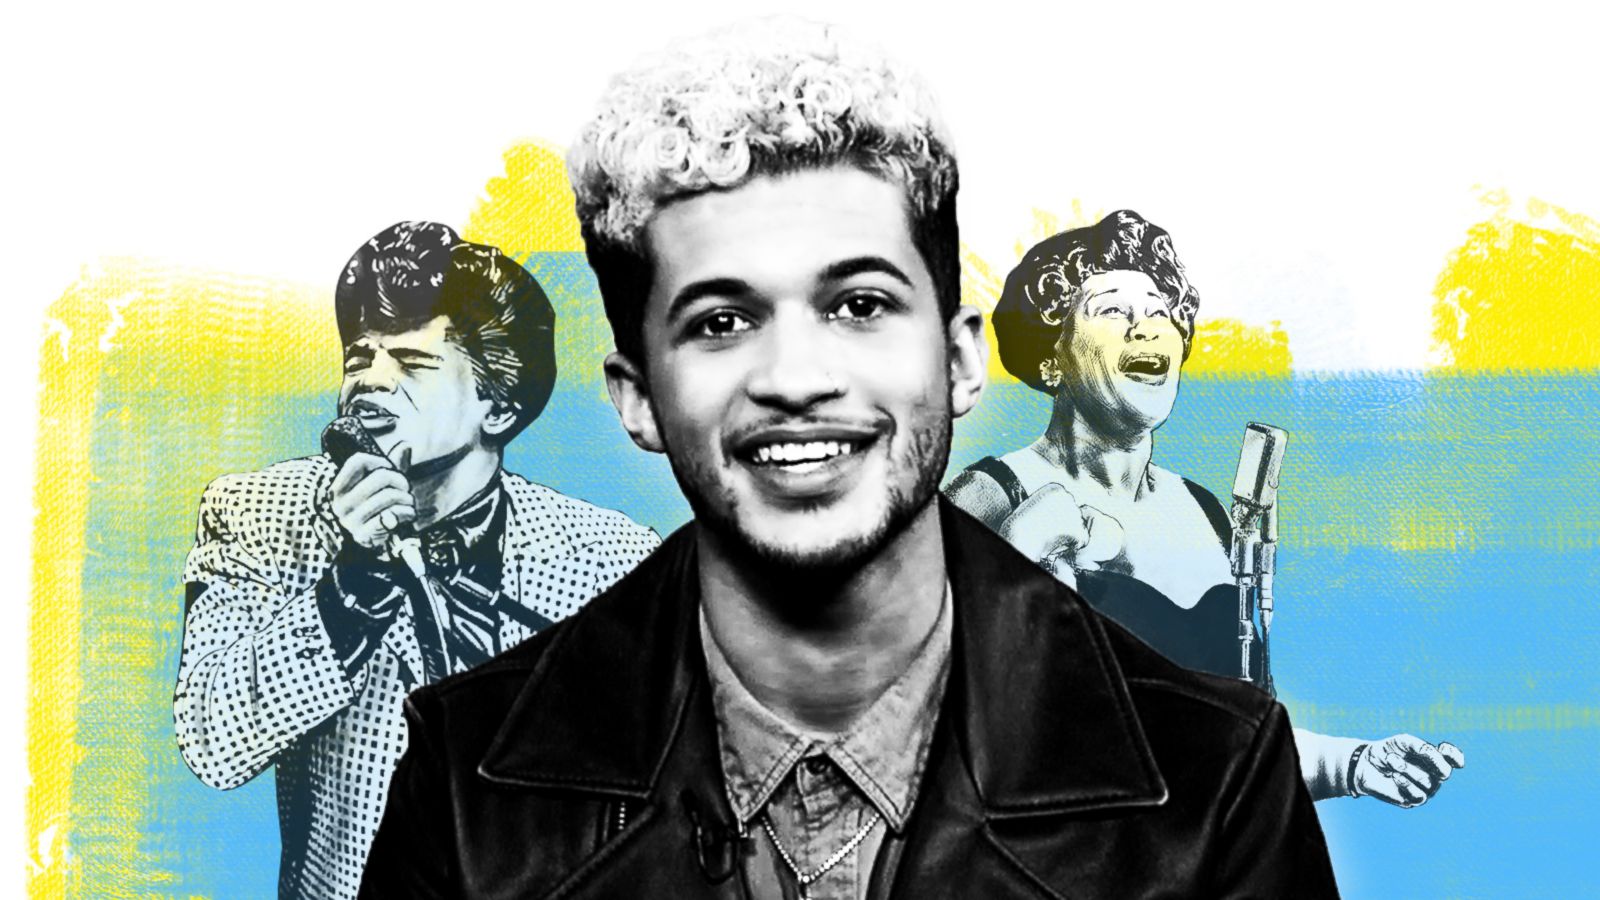 PHOTO: Jordan Fisher pays tribute to black trailblazers in honor of Black History Month.